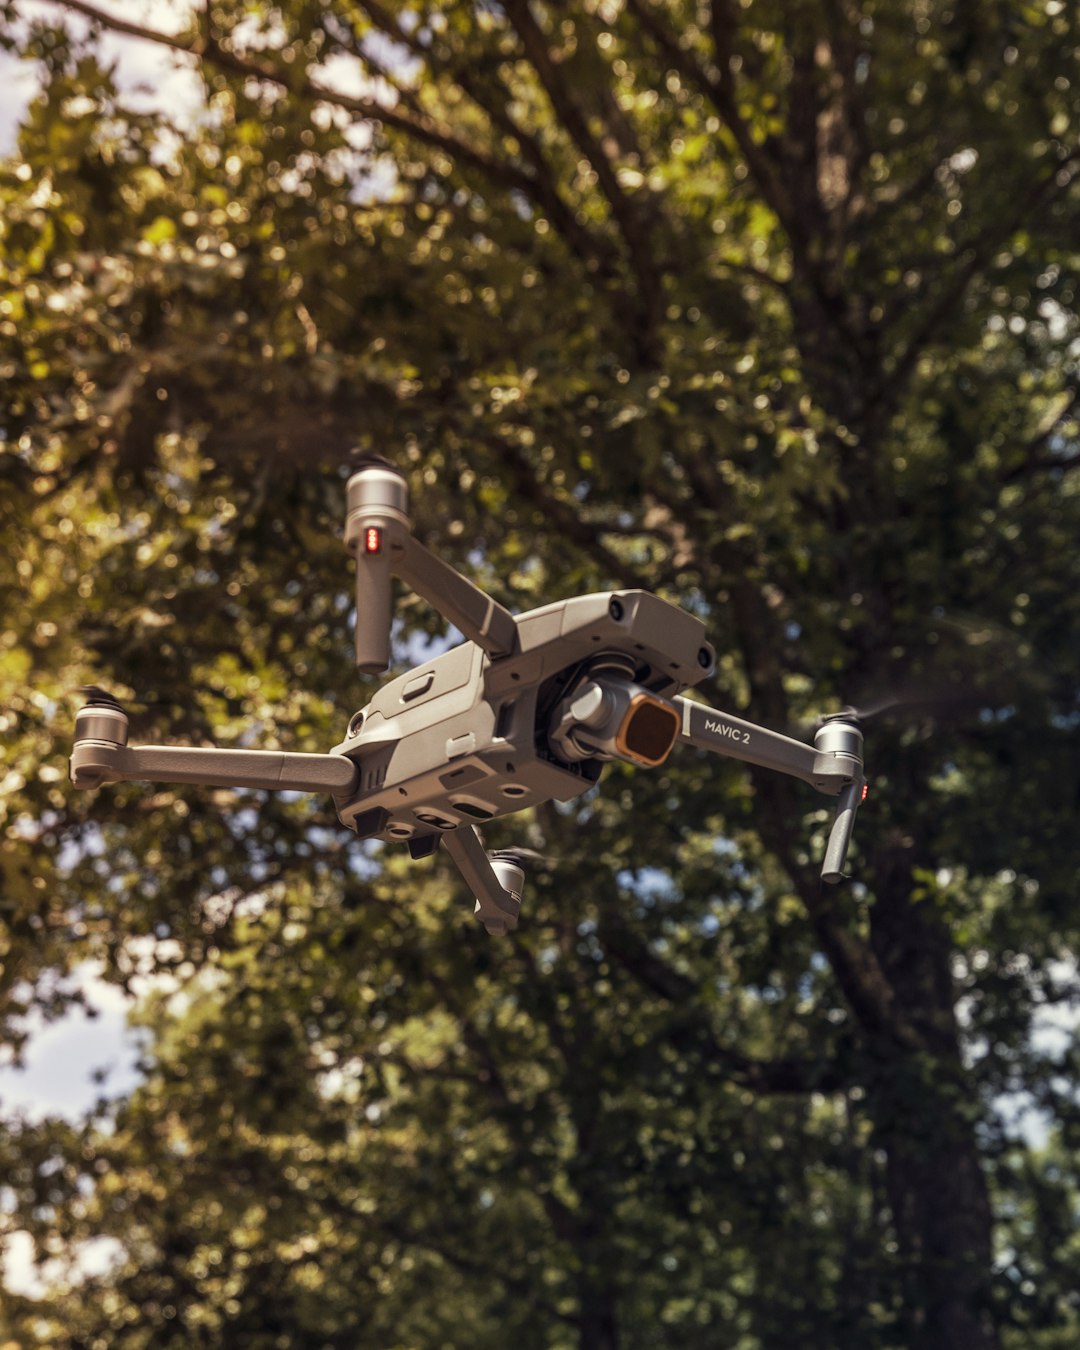 white and black drone flying over green trees during daytime